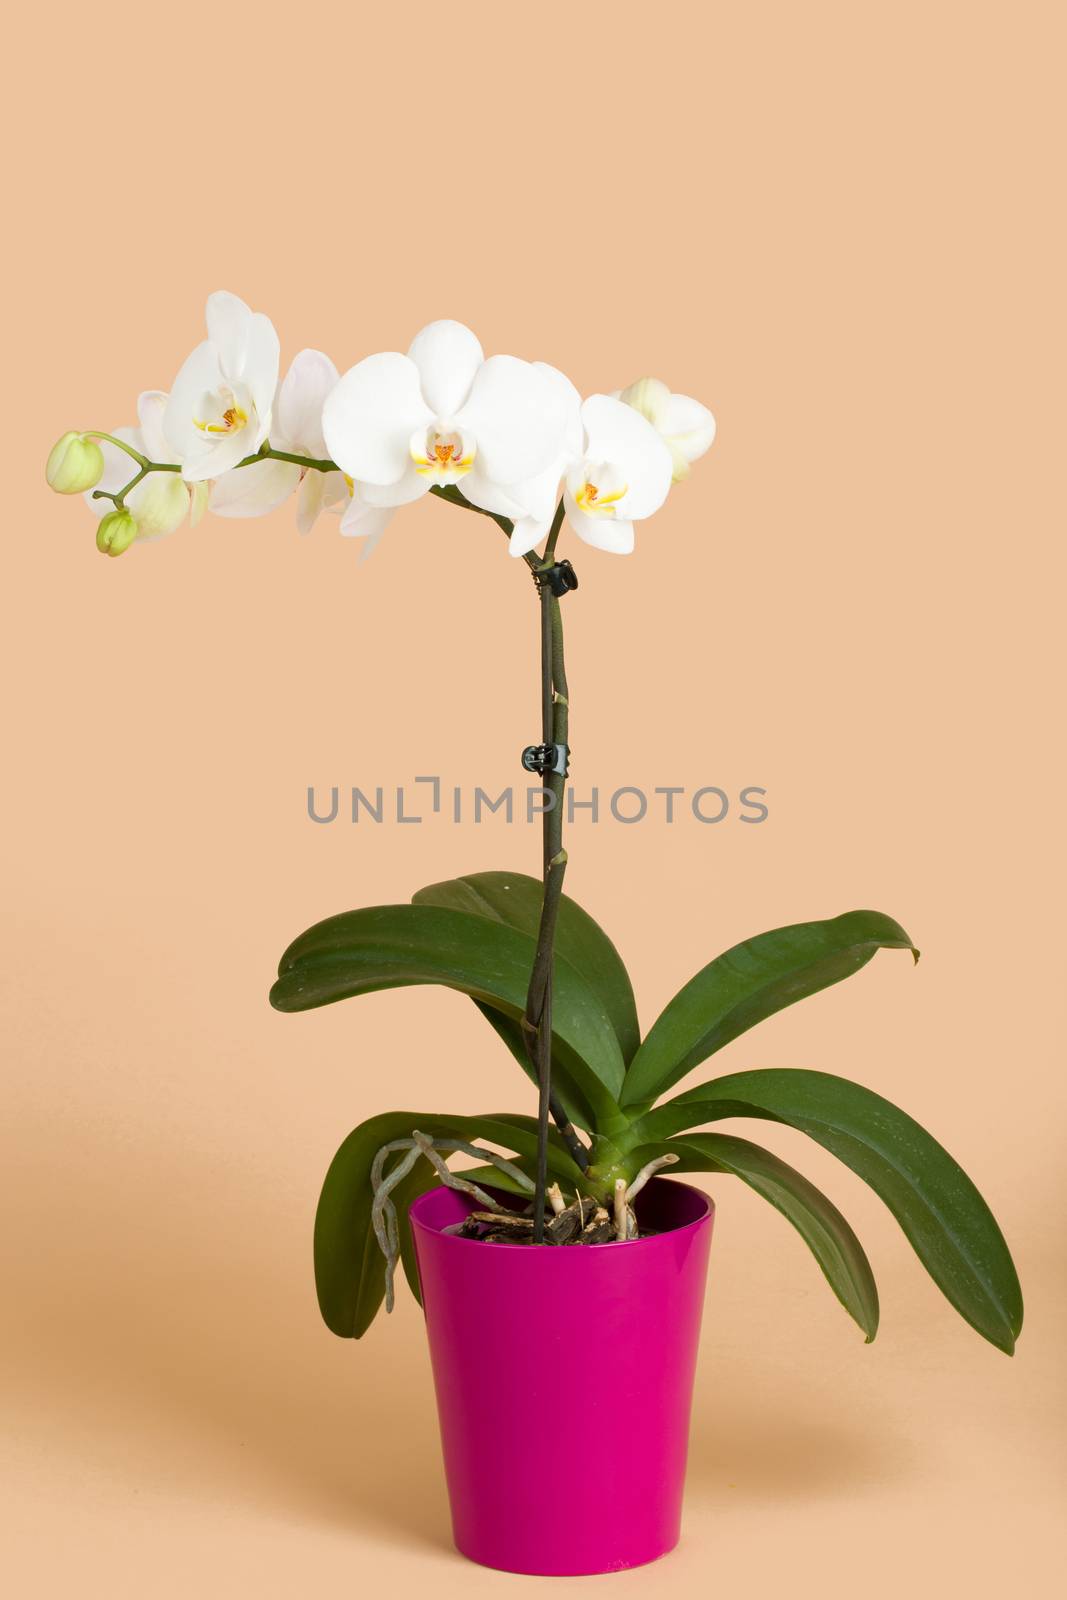 romantic branch of white orchid on beige background by artush